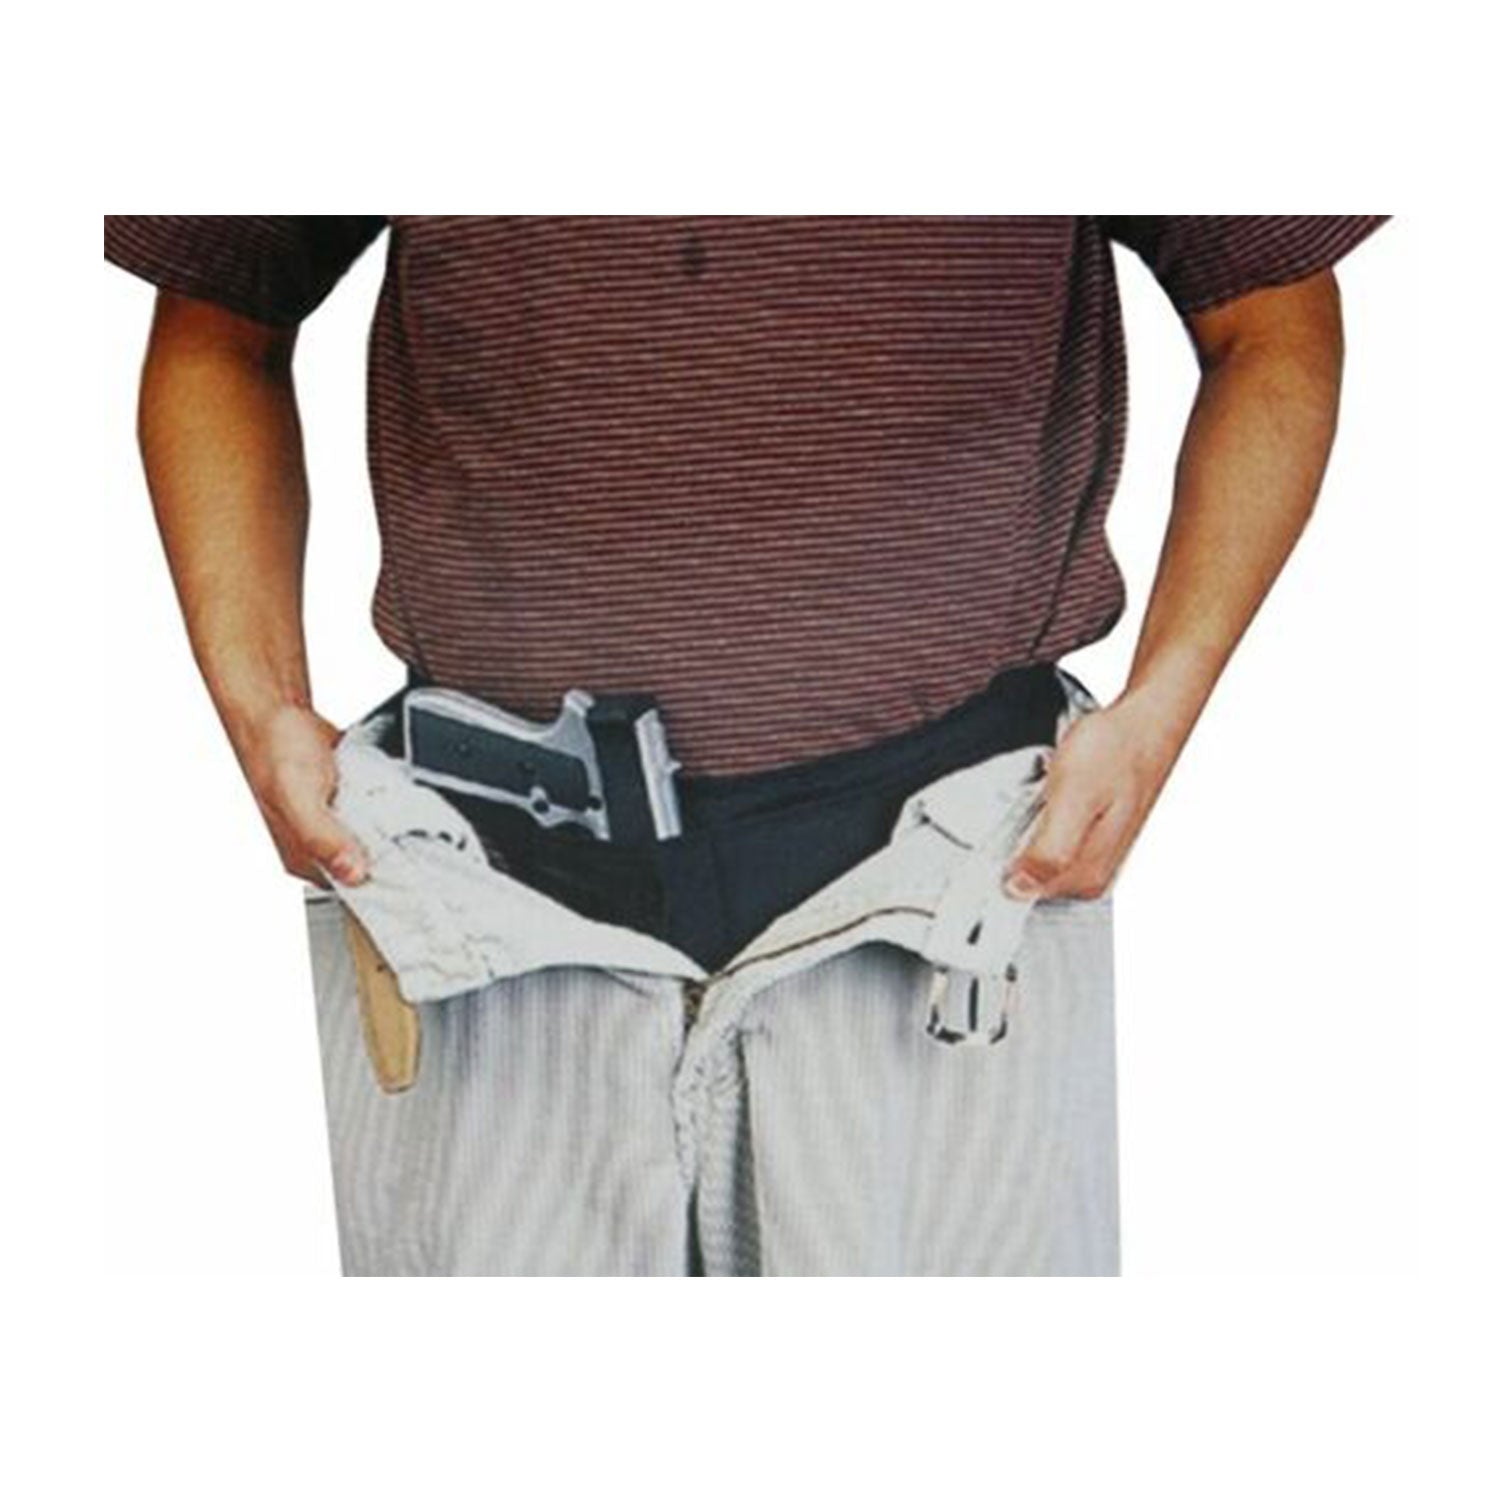 Concealed Carry Underwear | Protective Undergarments